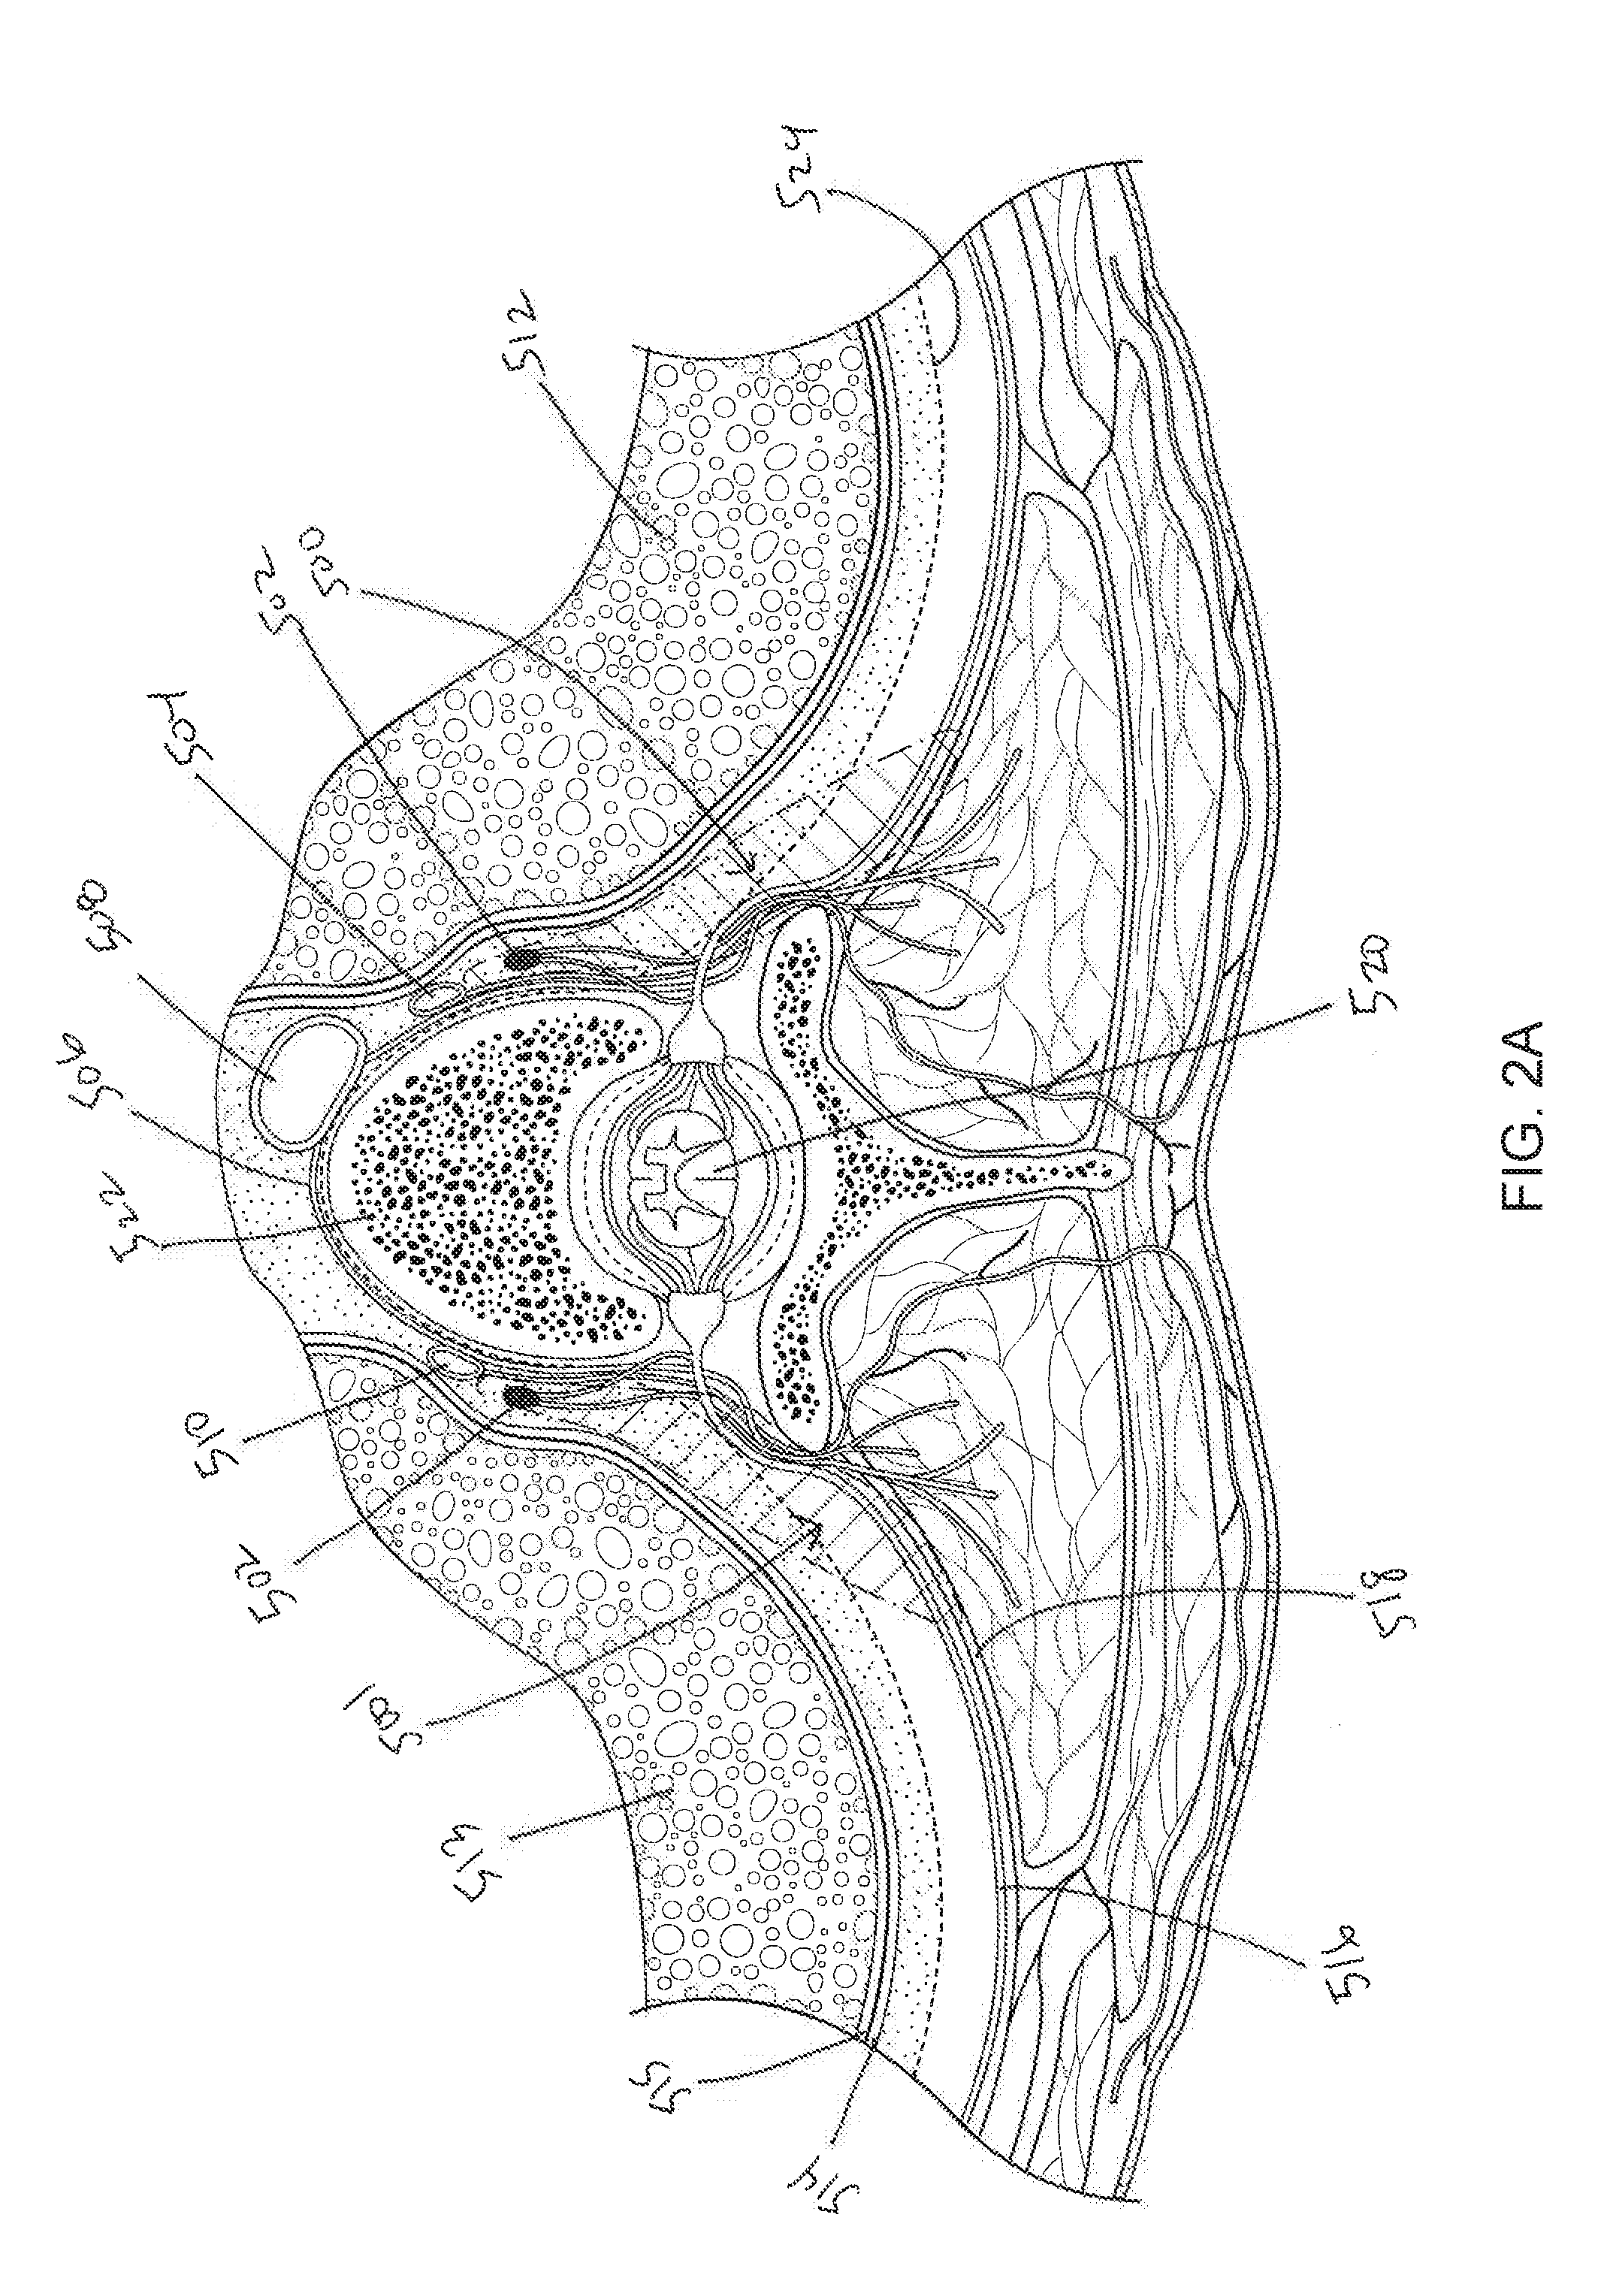 Systems and methods for sympathetic cardiopulmonary neuromodulation